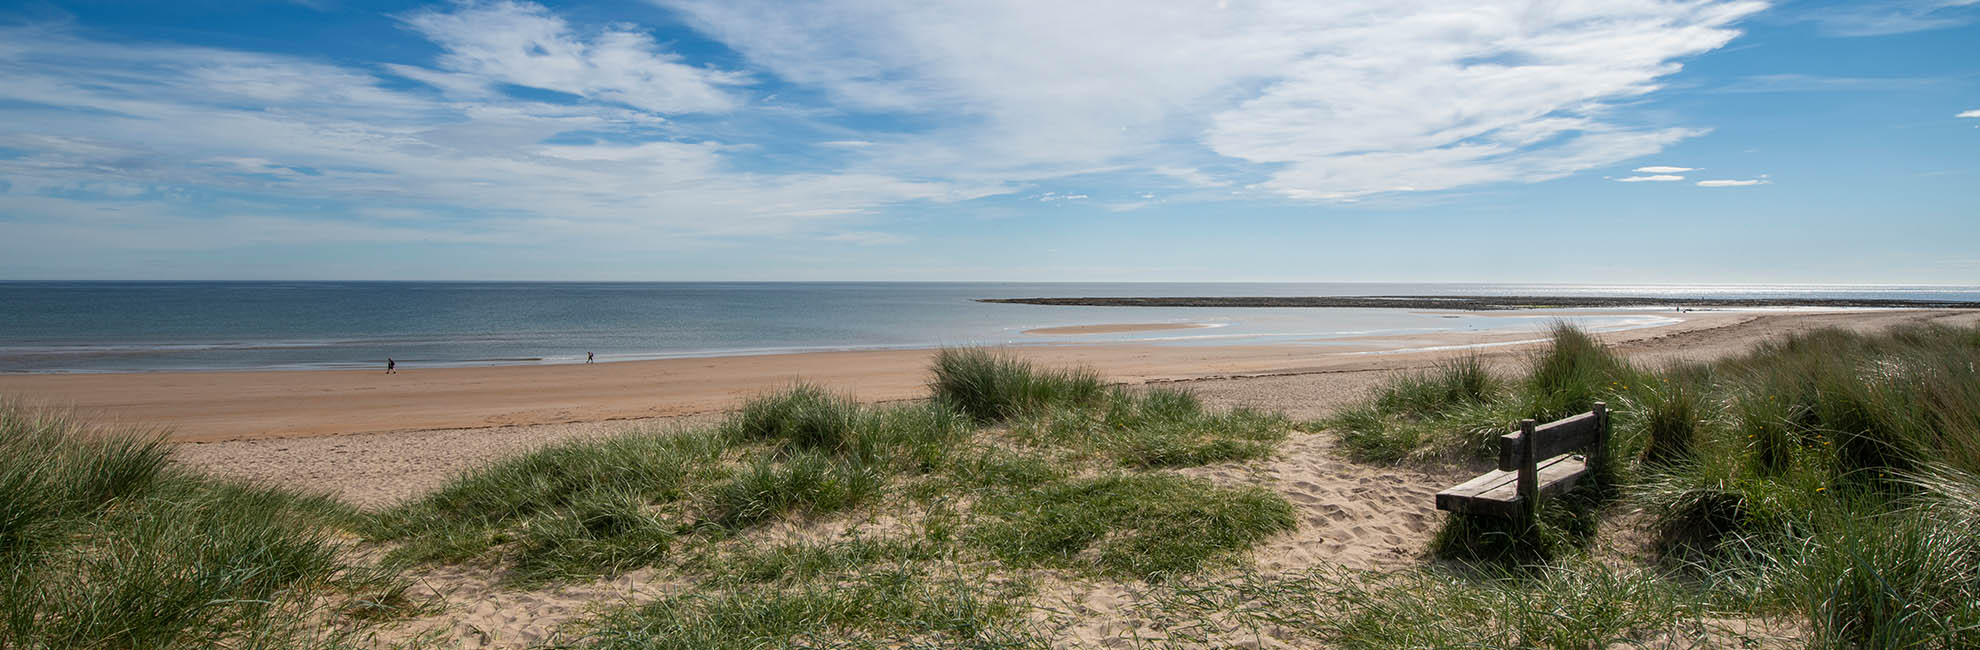 A view across the sand dunes towards the beach at Cresswell Towers